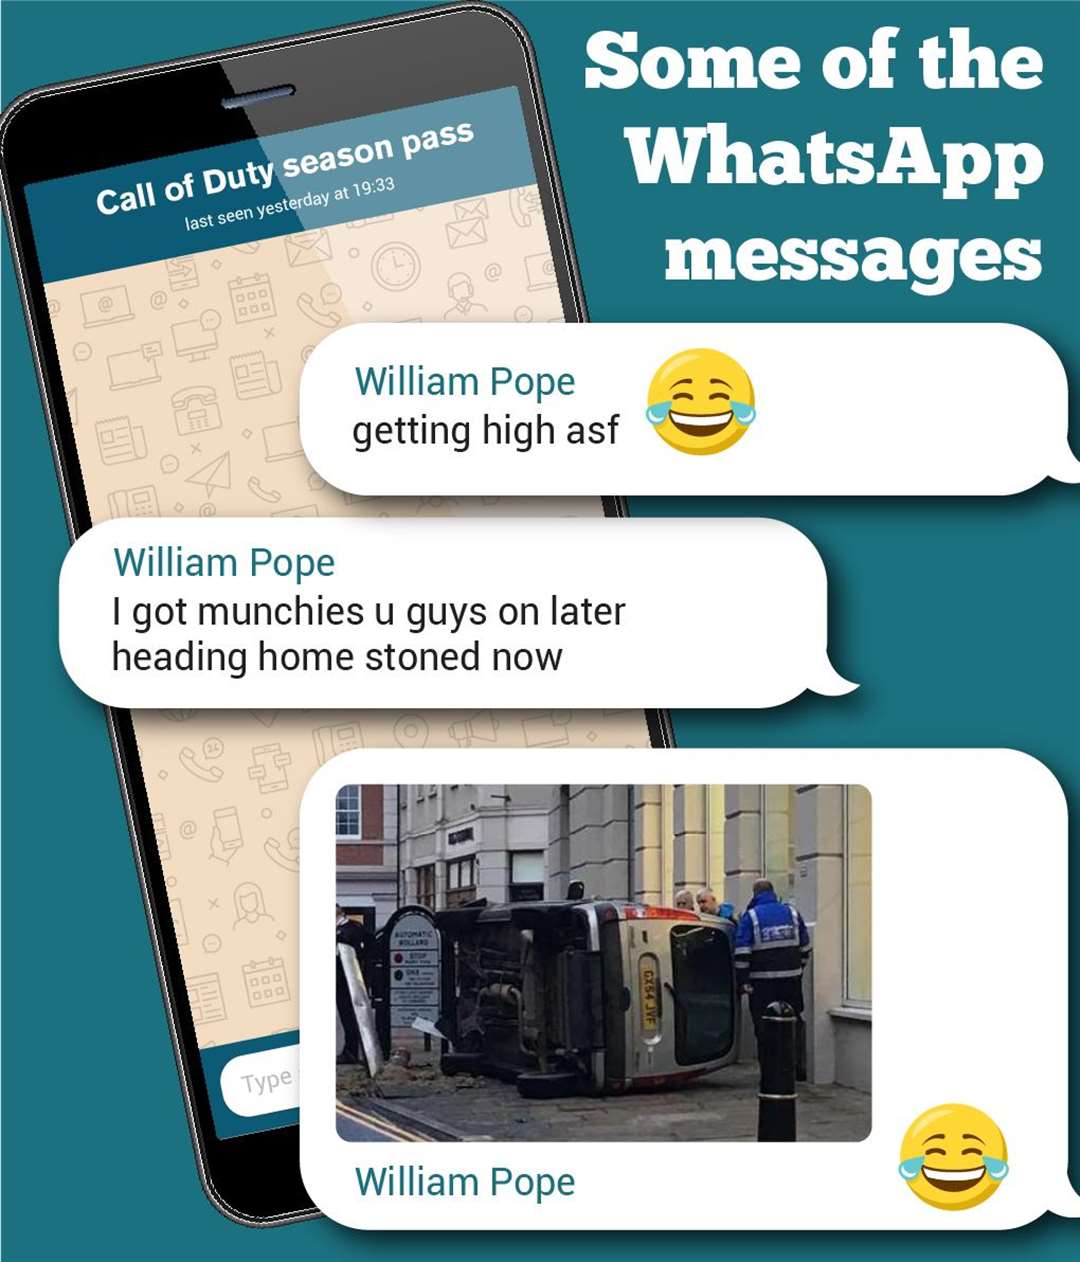 Examples of PC Pope's WhatsApp messages